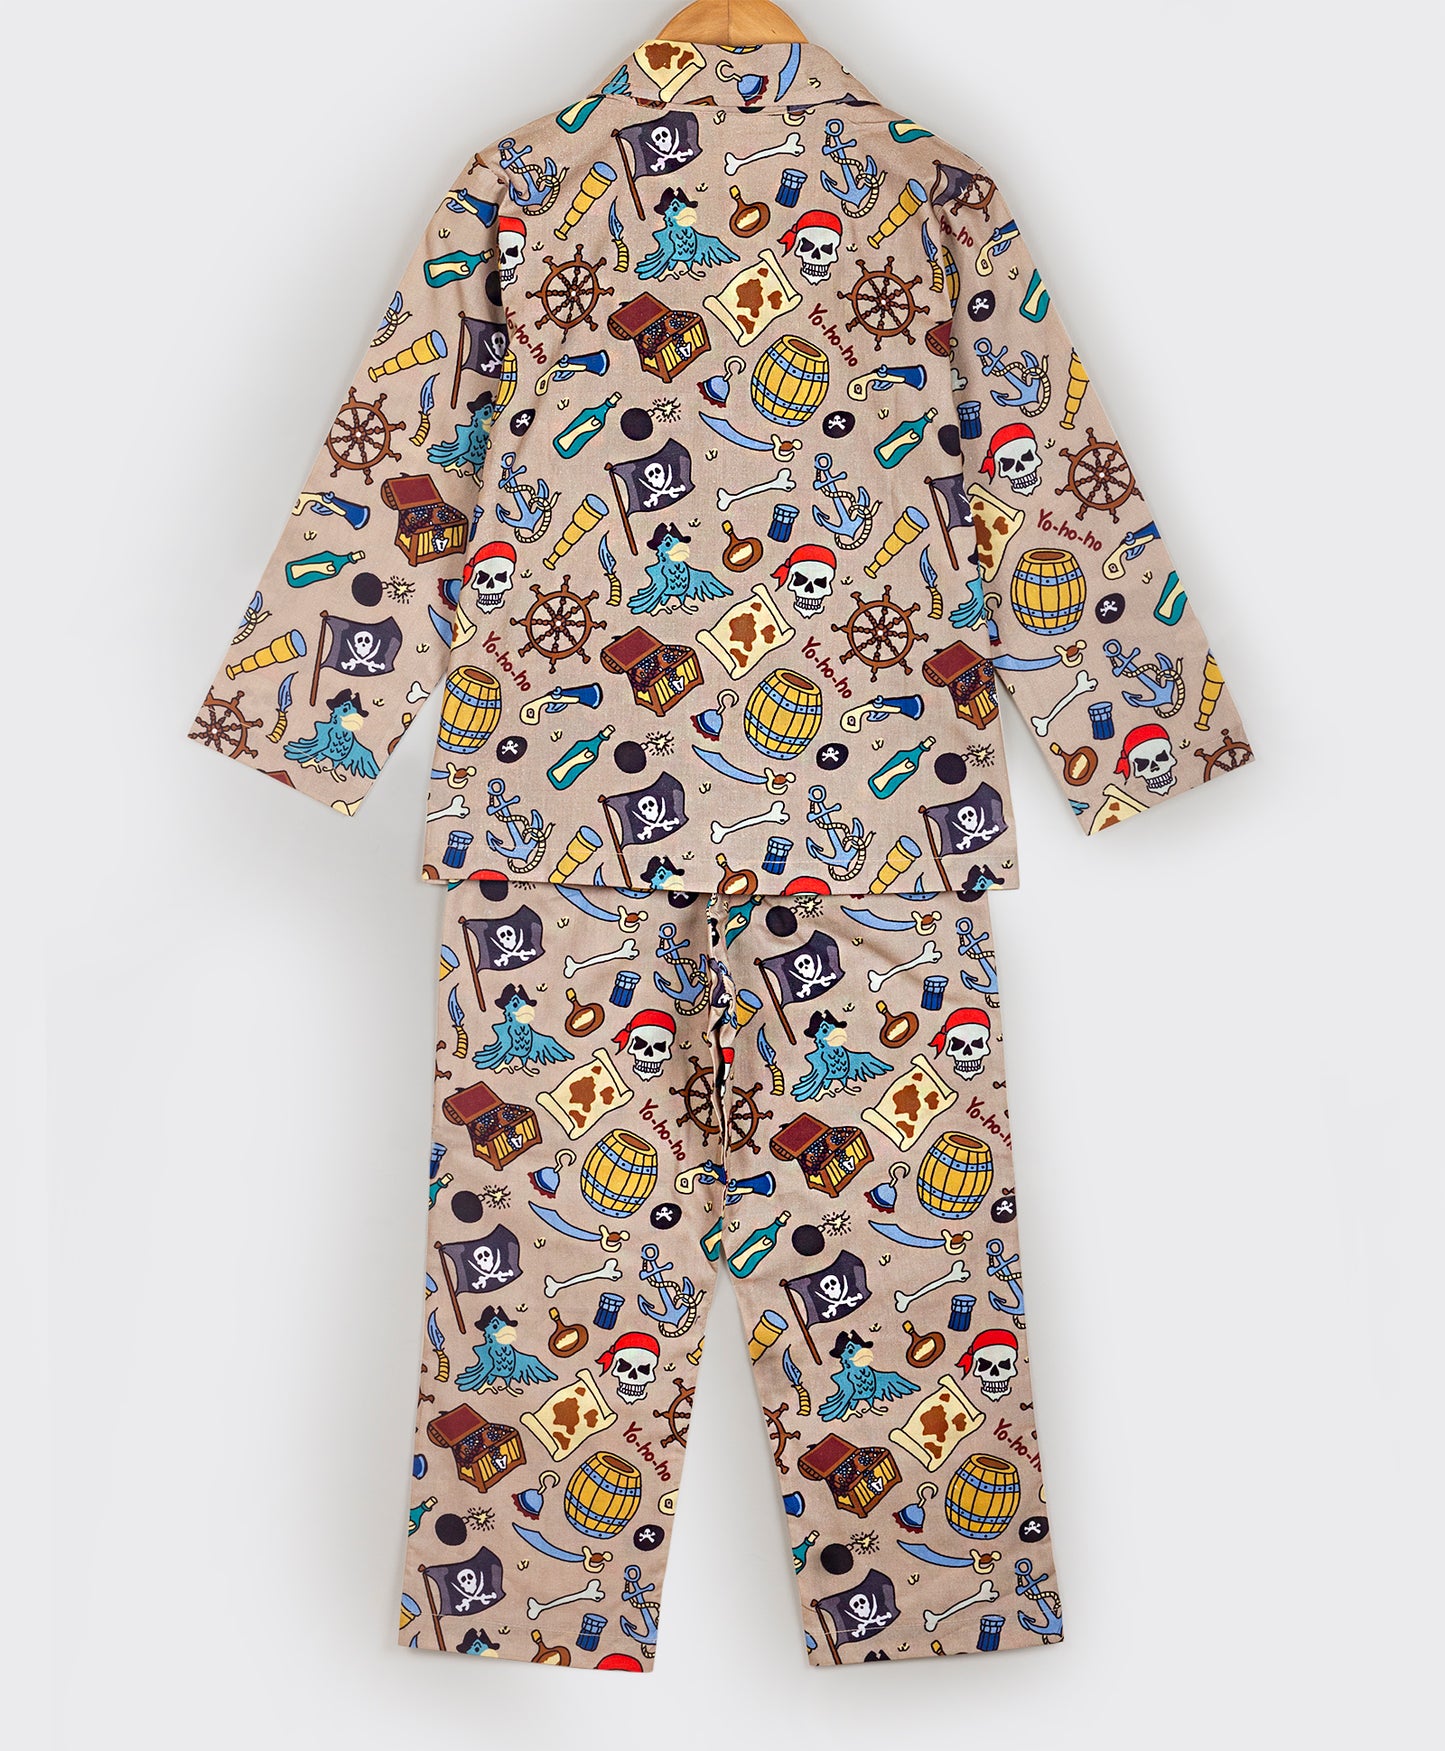 PIRATE AND ANCHOR PRINT NIGHTSUIT